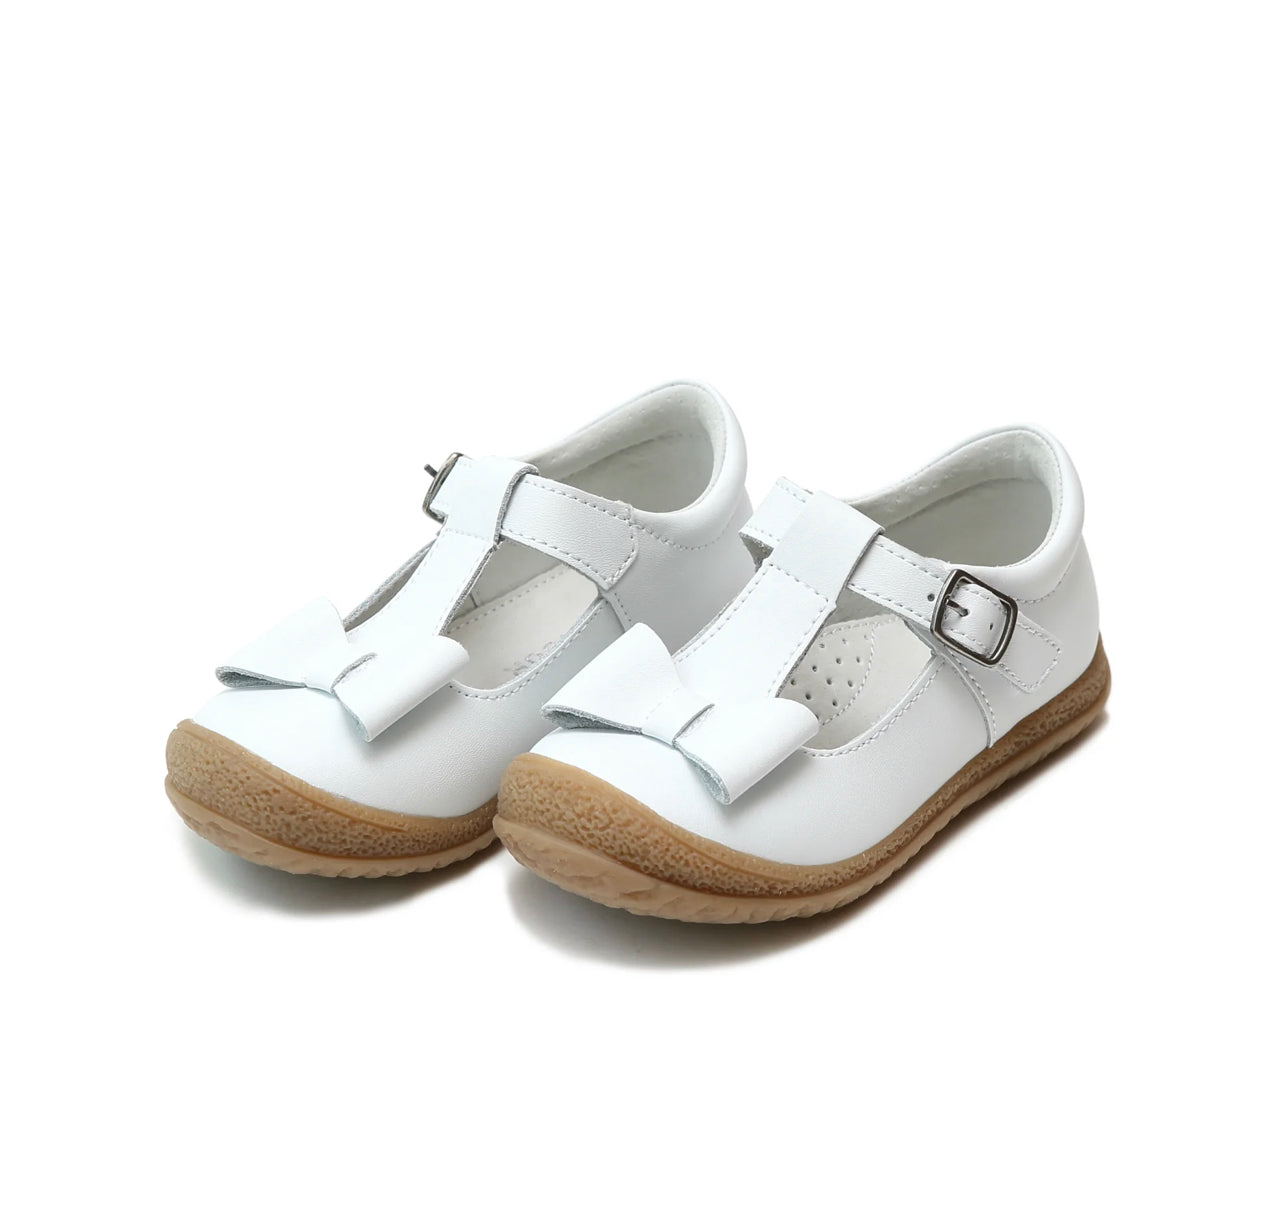 Preorder Emma Bow T-Strap Mary Jane L’amour Shoes